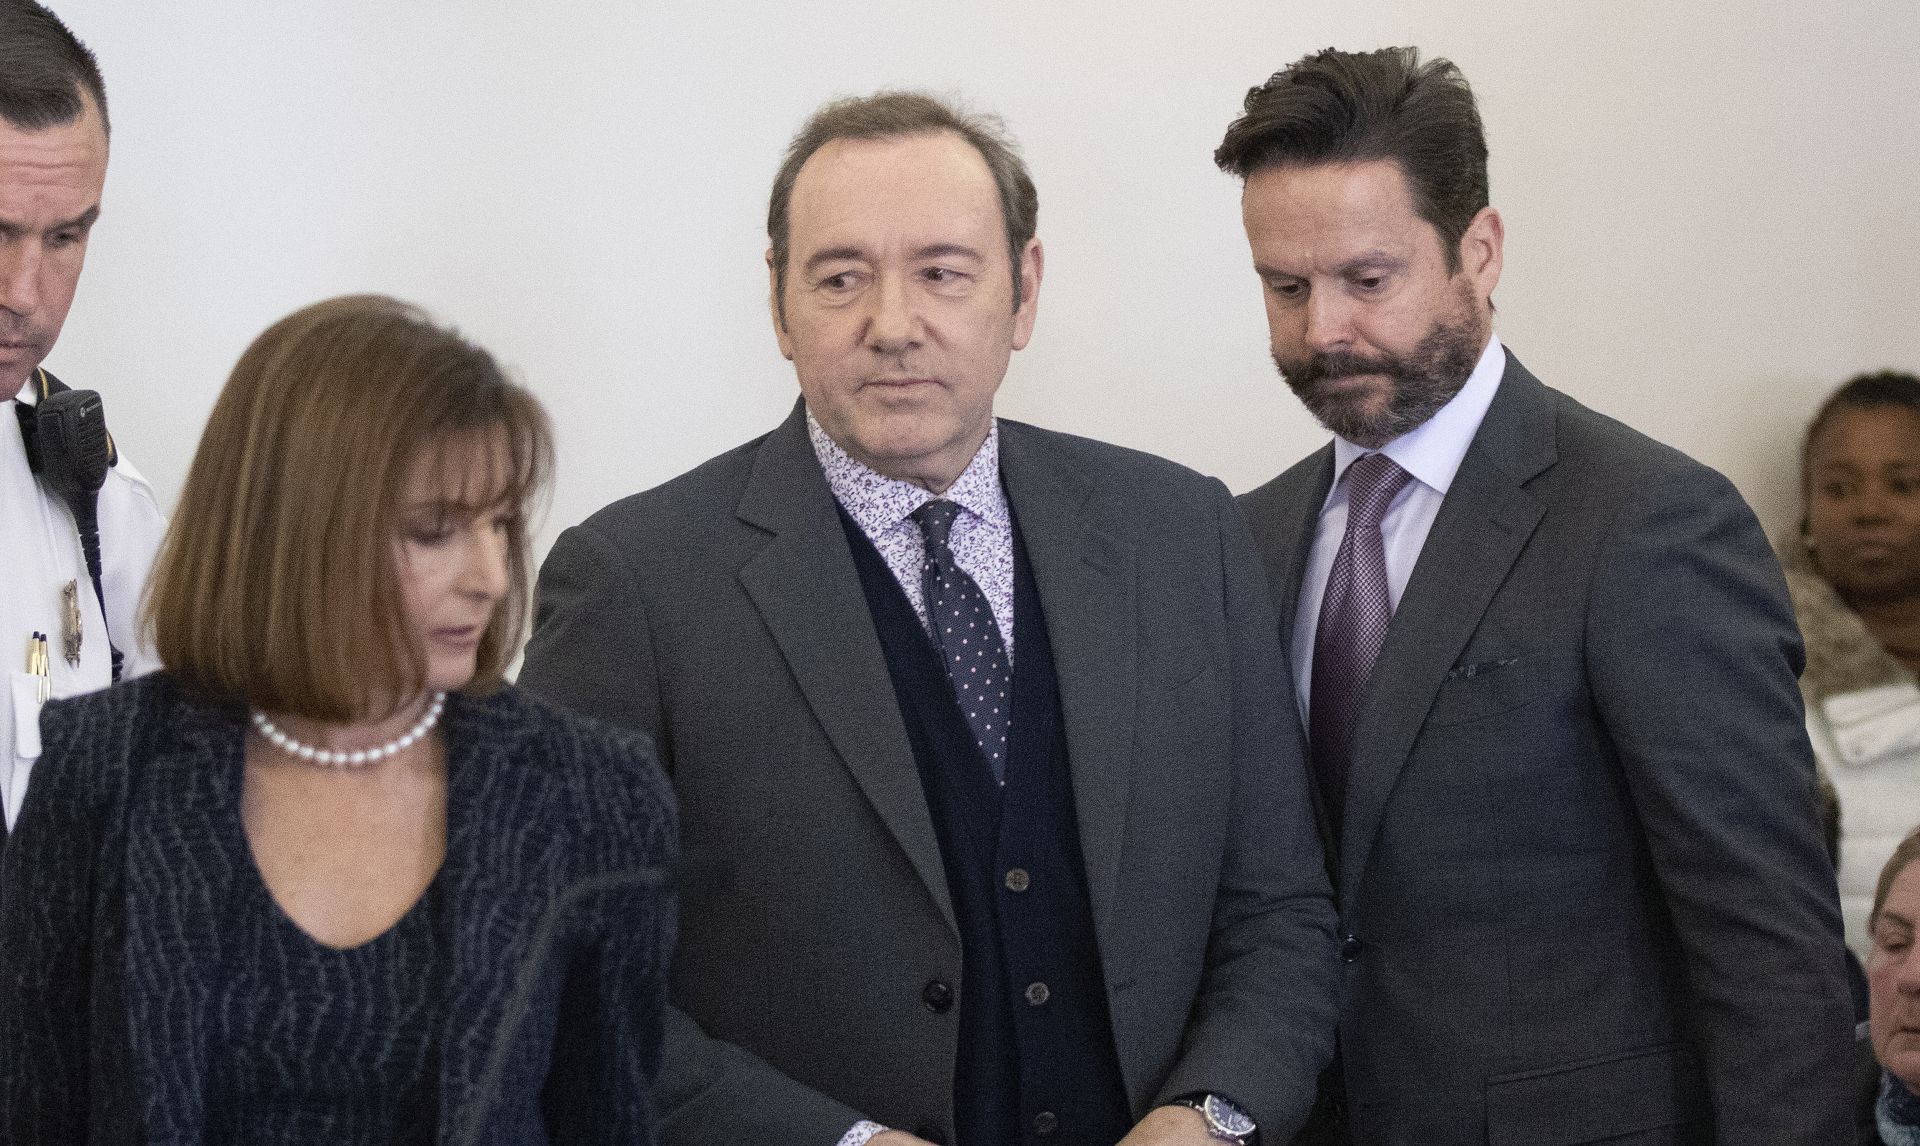 epa07268182 Actor Kevin Spacey (C) and his attorneys Alan Jackson (R) and Juliane Balliro (L) arrive appear at the Nantucket District Court, in Nantucket, Massachusetts, USA, 07 January 2019. Spacey appeared at the Nantucket District Court for arraignment on a sexual assault charge that allegedly took place at the Club Car in July 2016. According to reports, Spacey has said he will plead not guilty.  EPA/NICOLE HARNISHFEGER / POOL